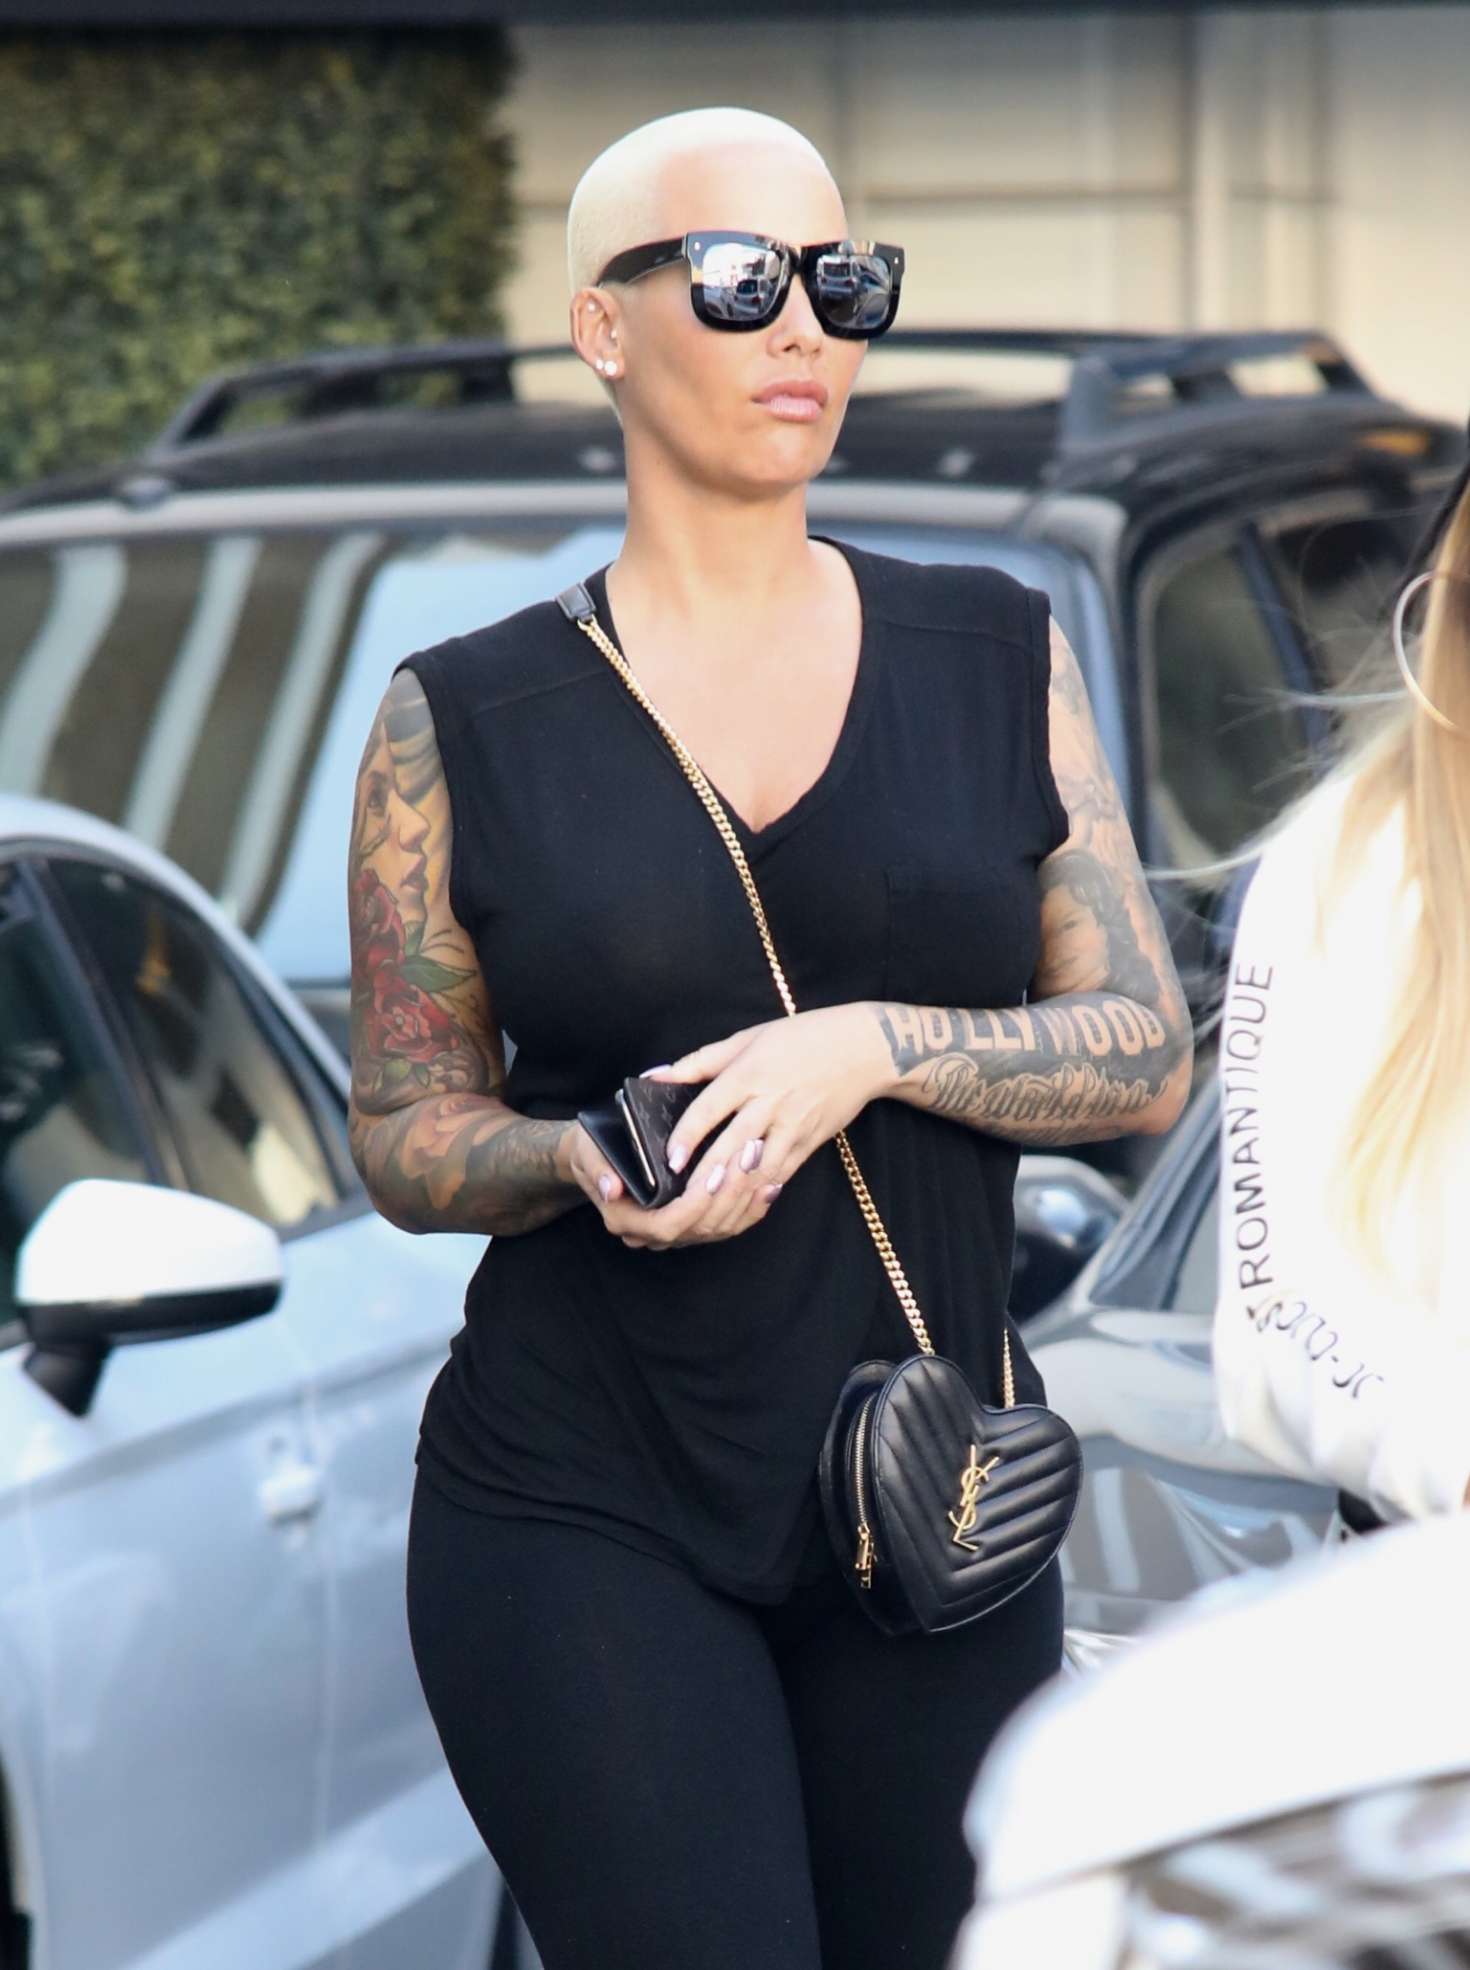 Amber Rose - Leaving Epione in Beverly Hills